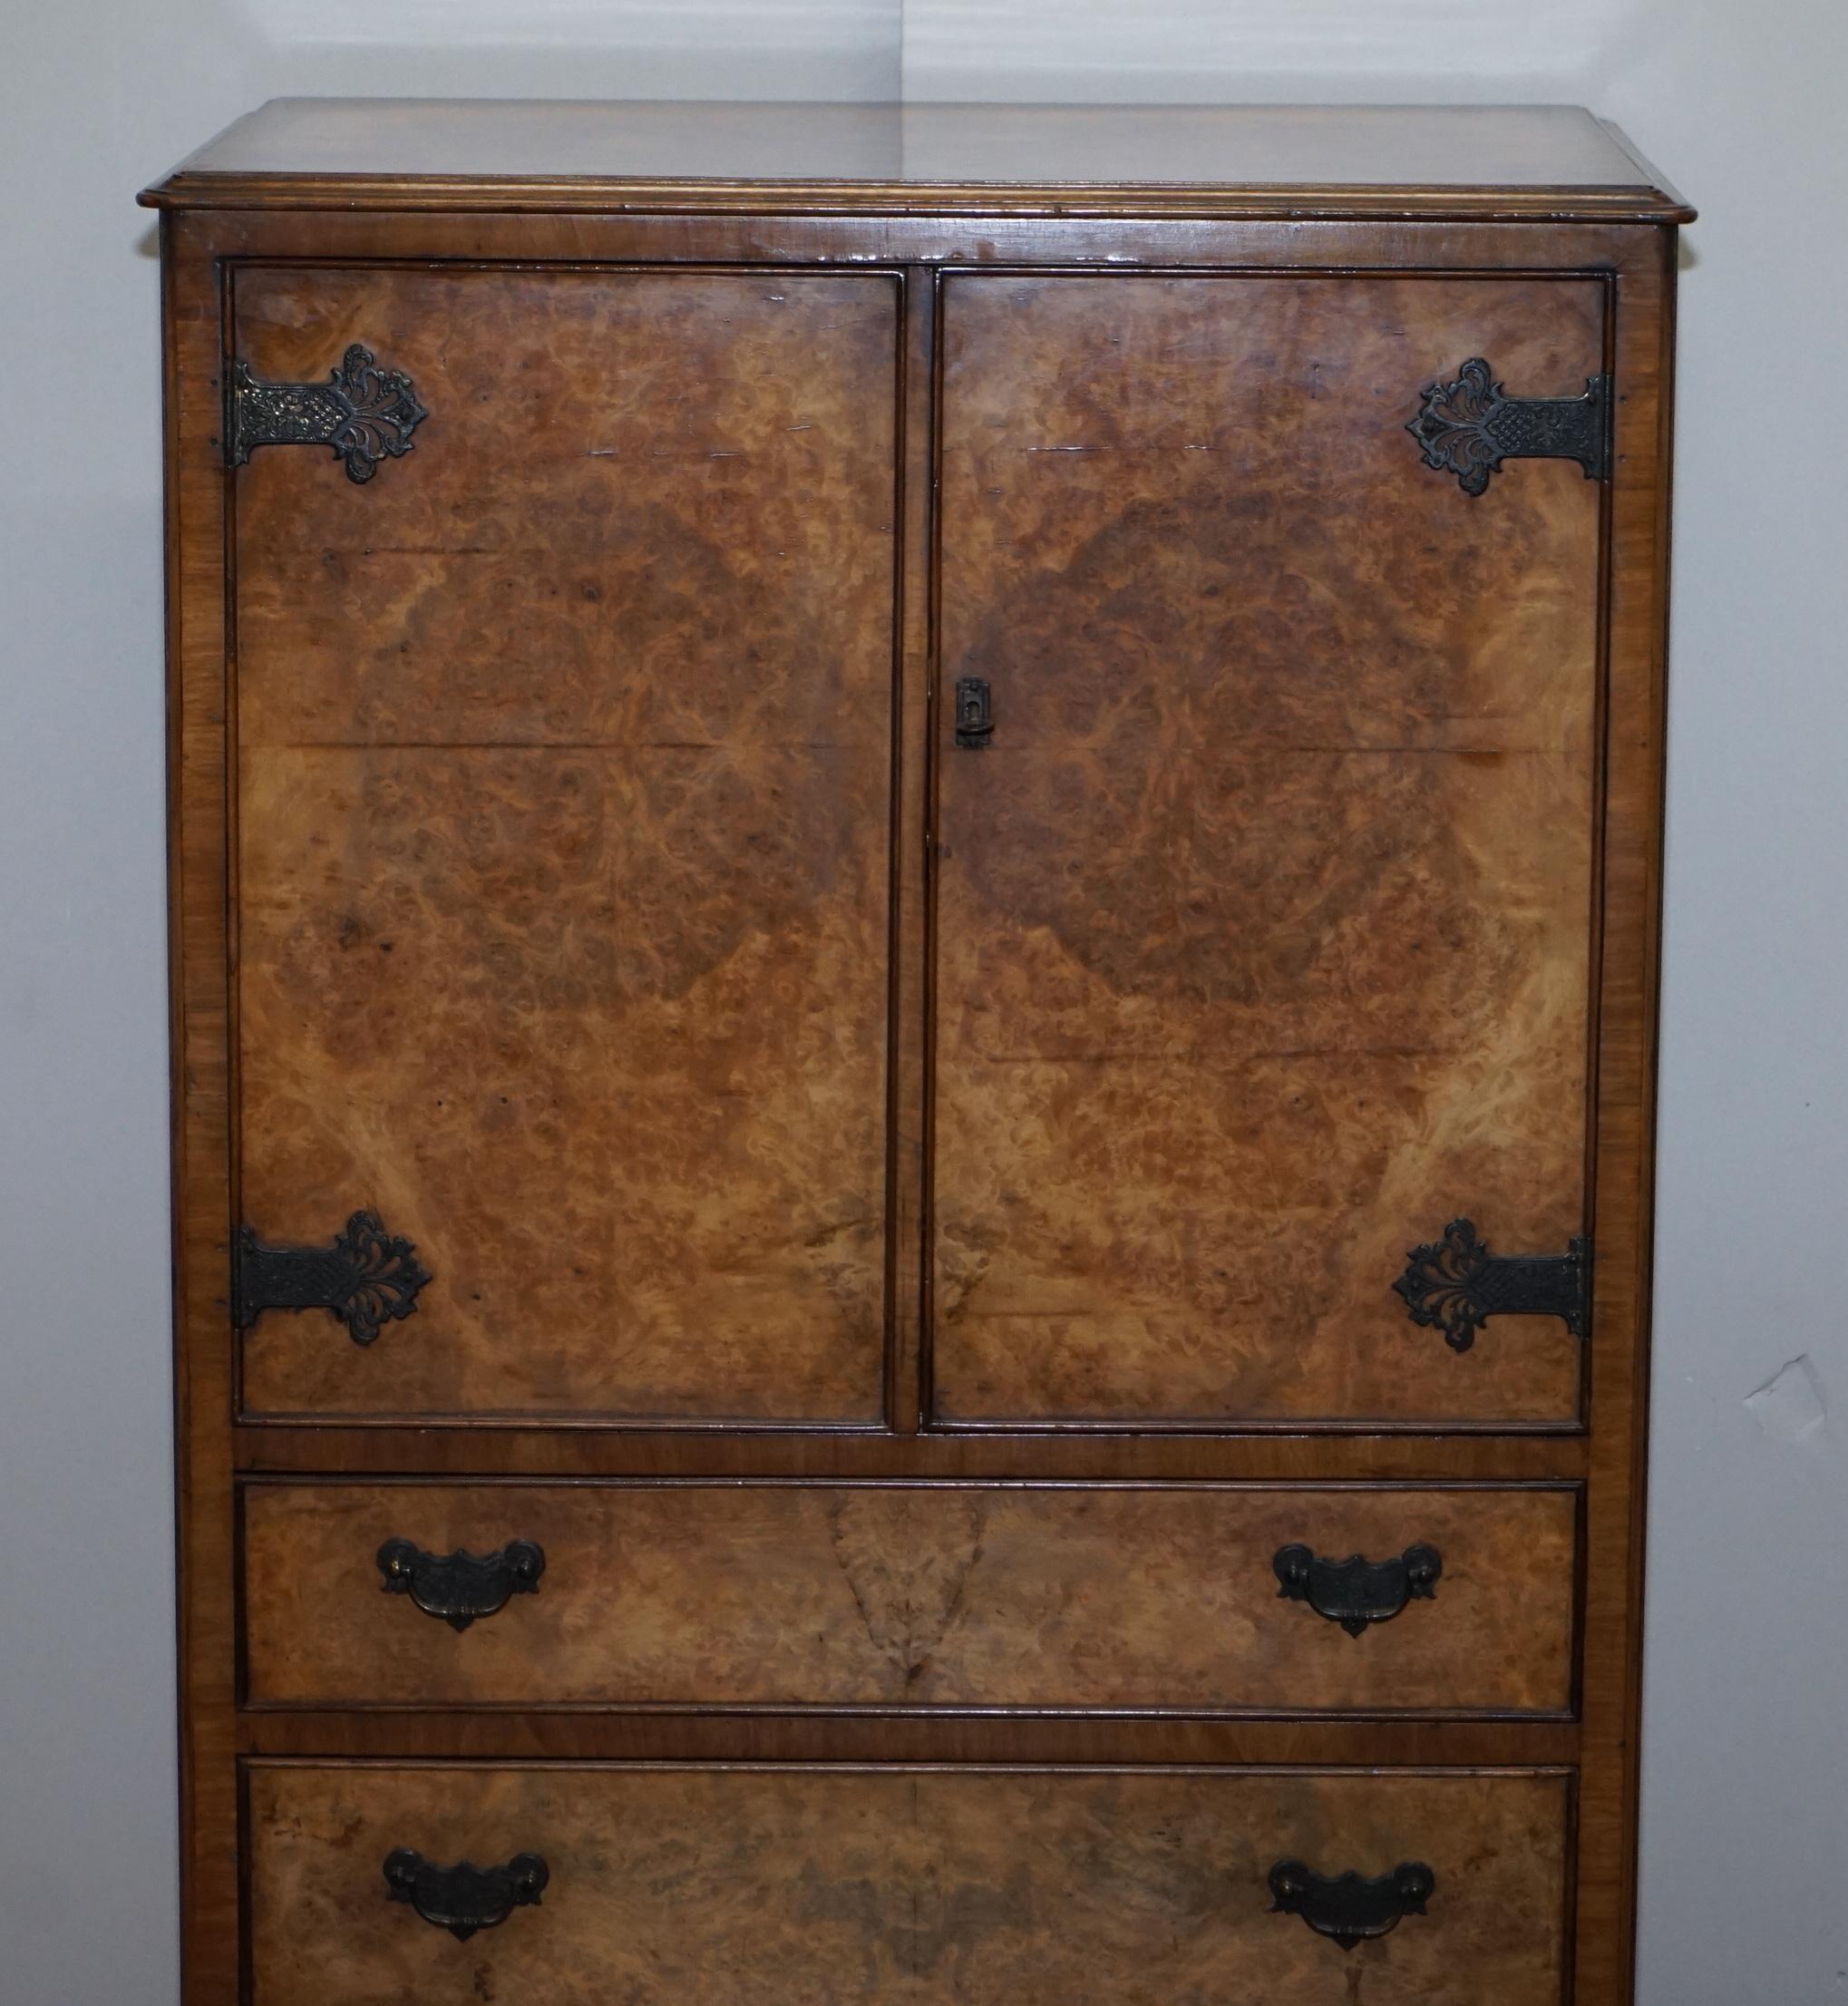 Hand-Crafted Lovely Art Deco Burr Walnut Drinks Cabinet Carved Legs, Lockable Doors Drawers